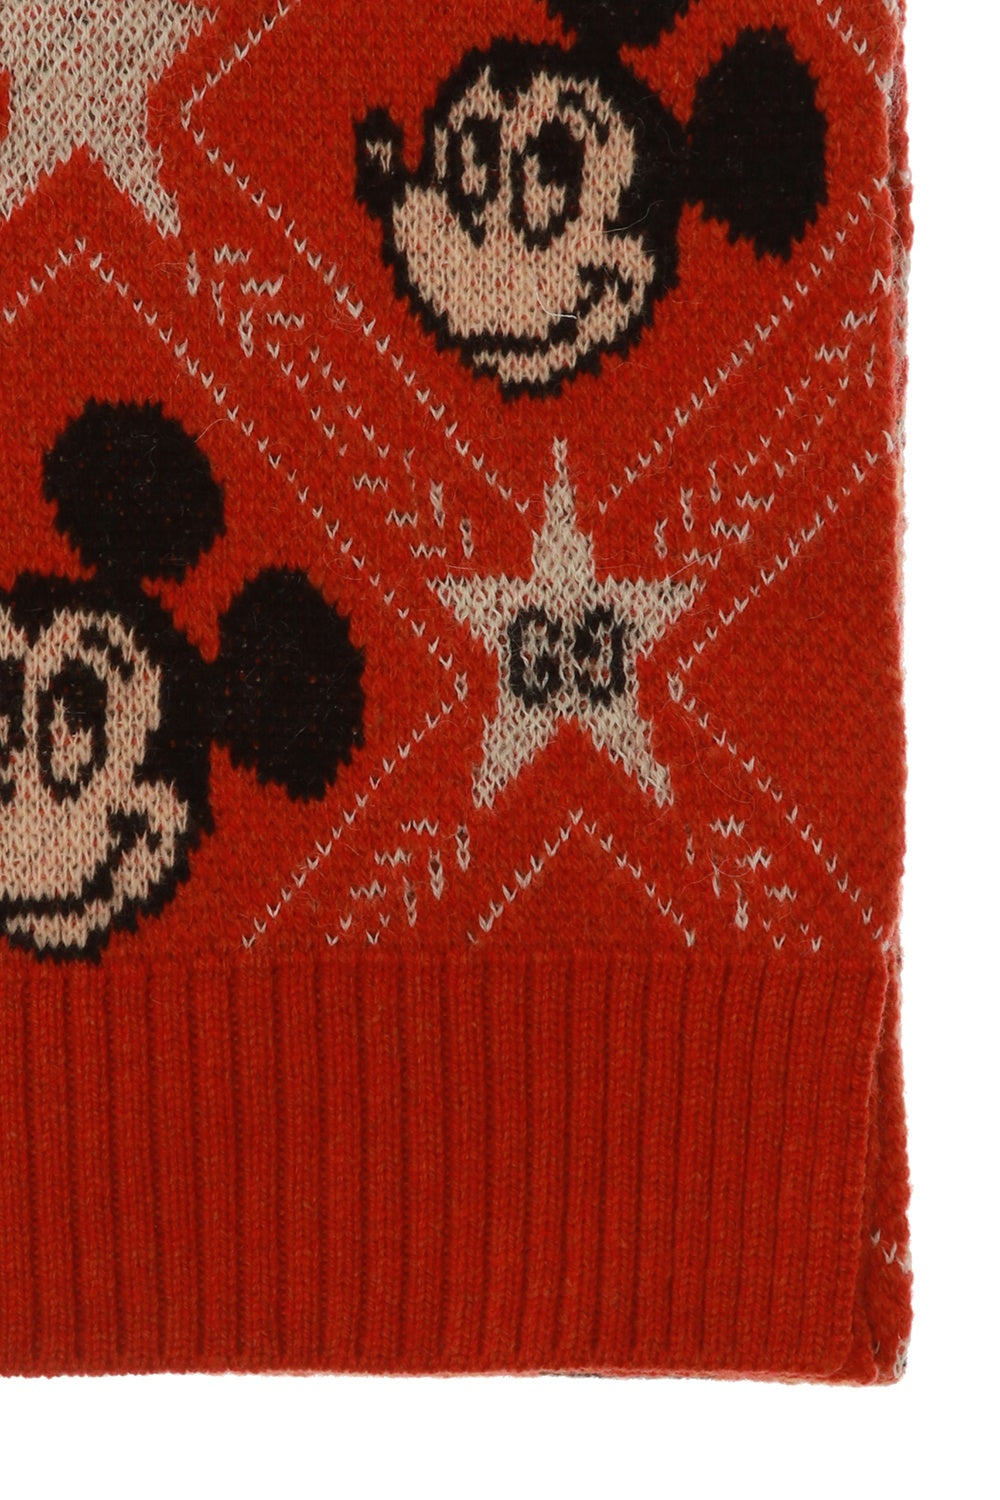 Gucci x Disney Mickey Mouse Wool Scarf In Blue –